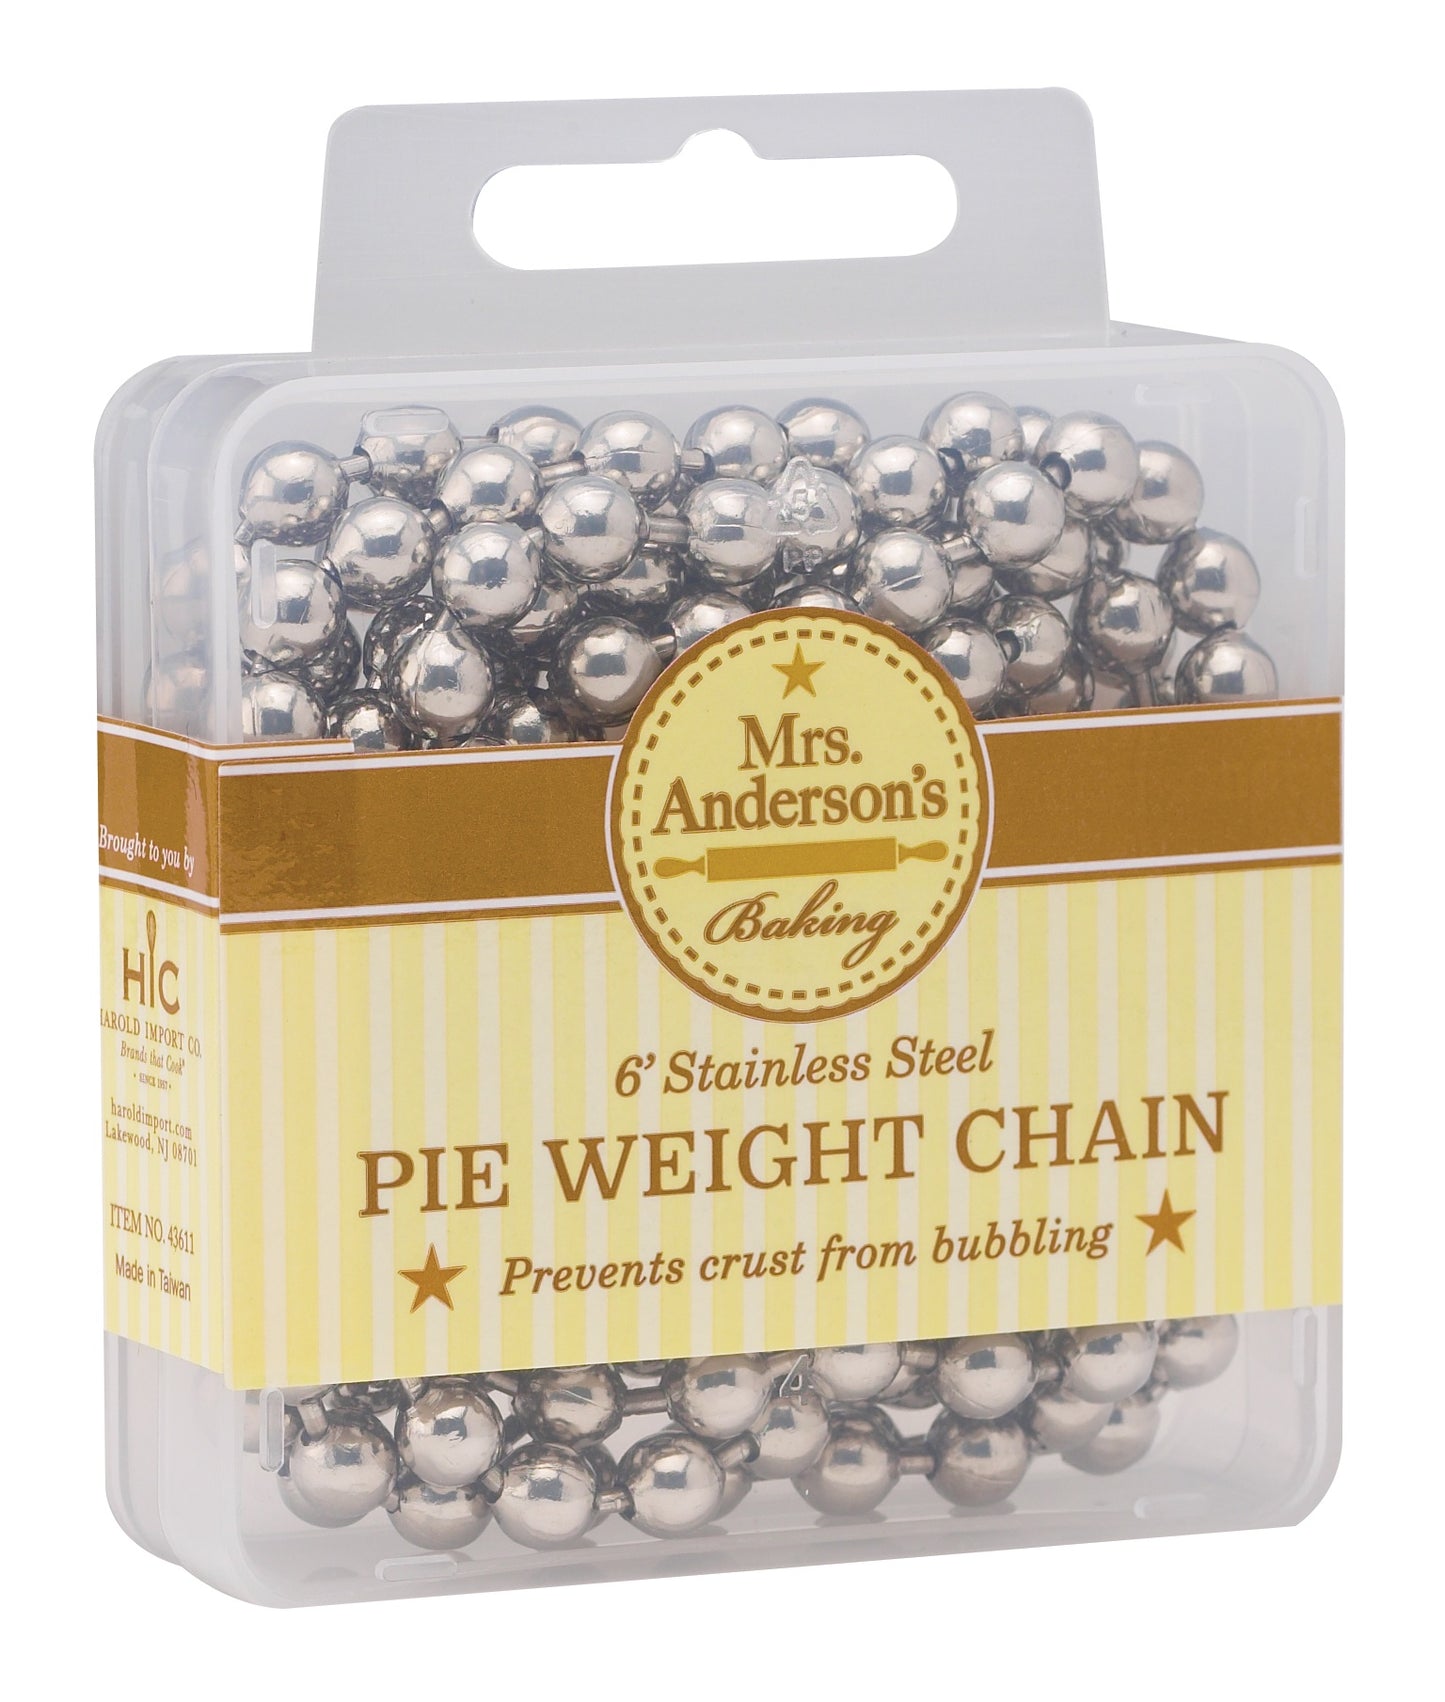 6 Foot Pie Weight Chain, Mrs. Anderson's